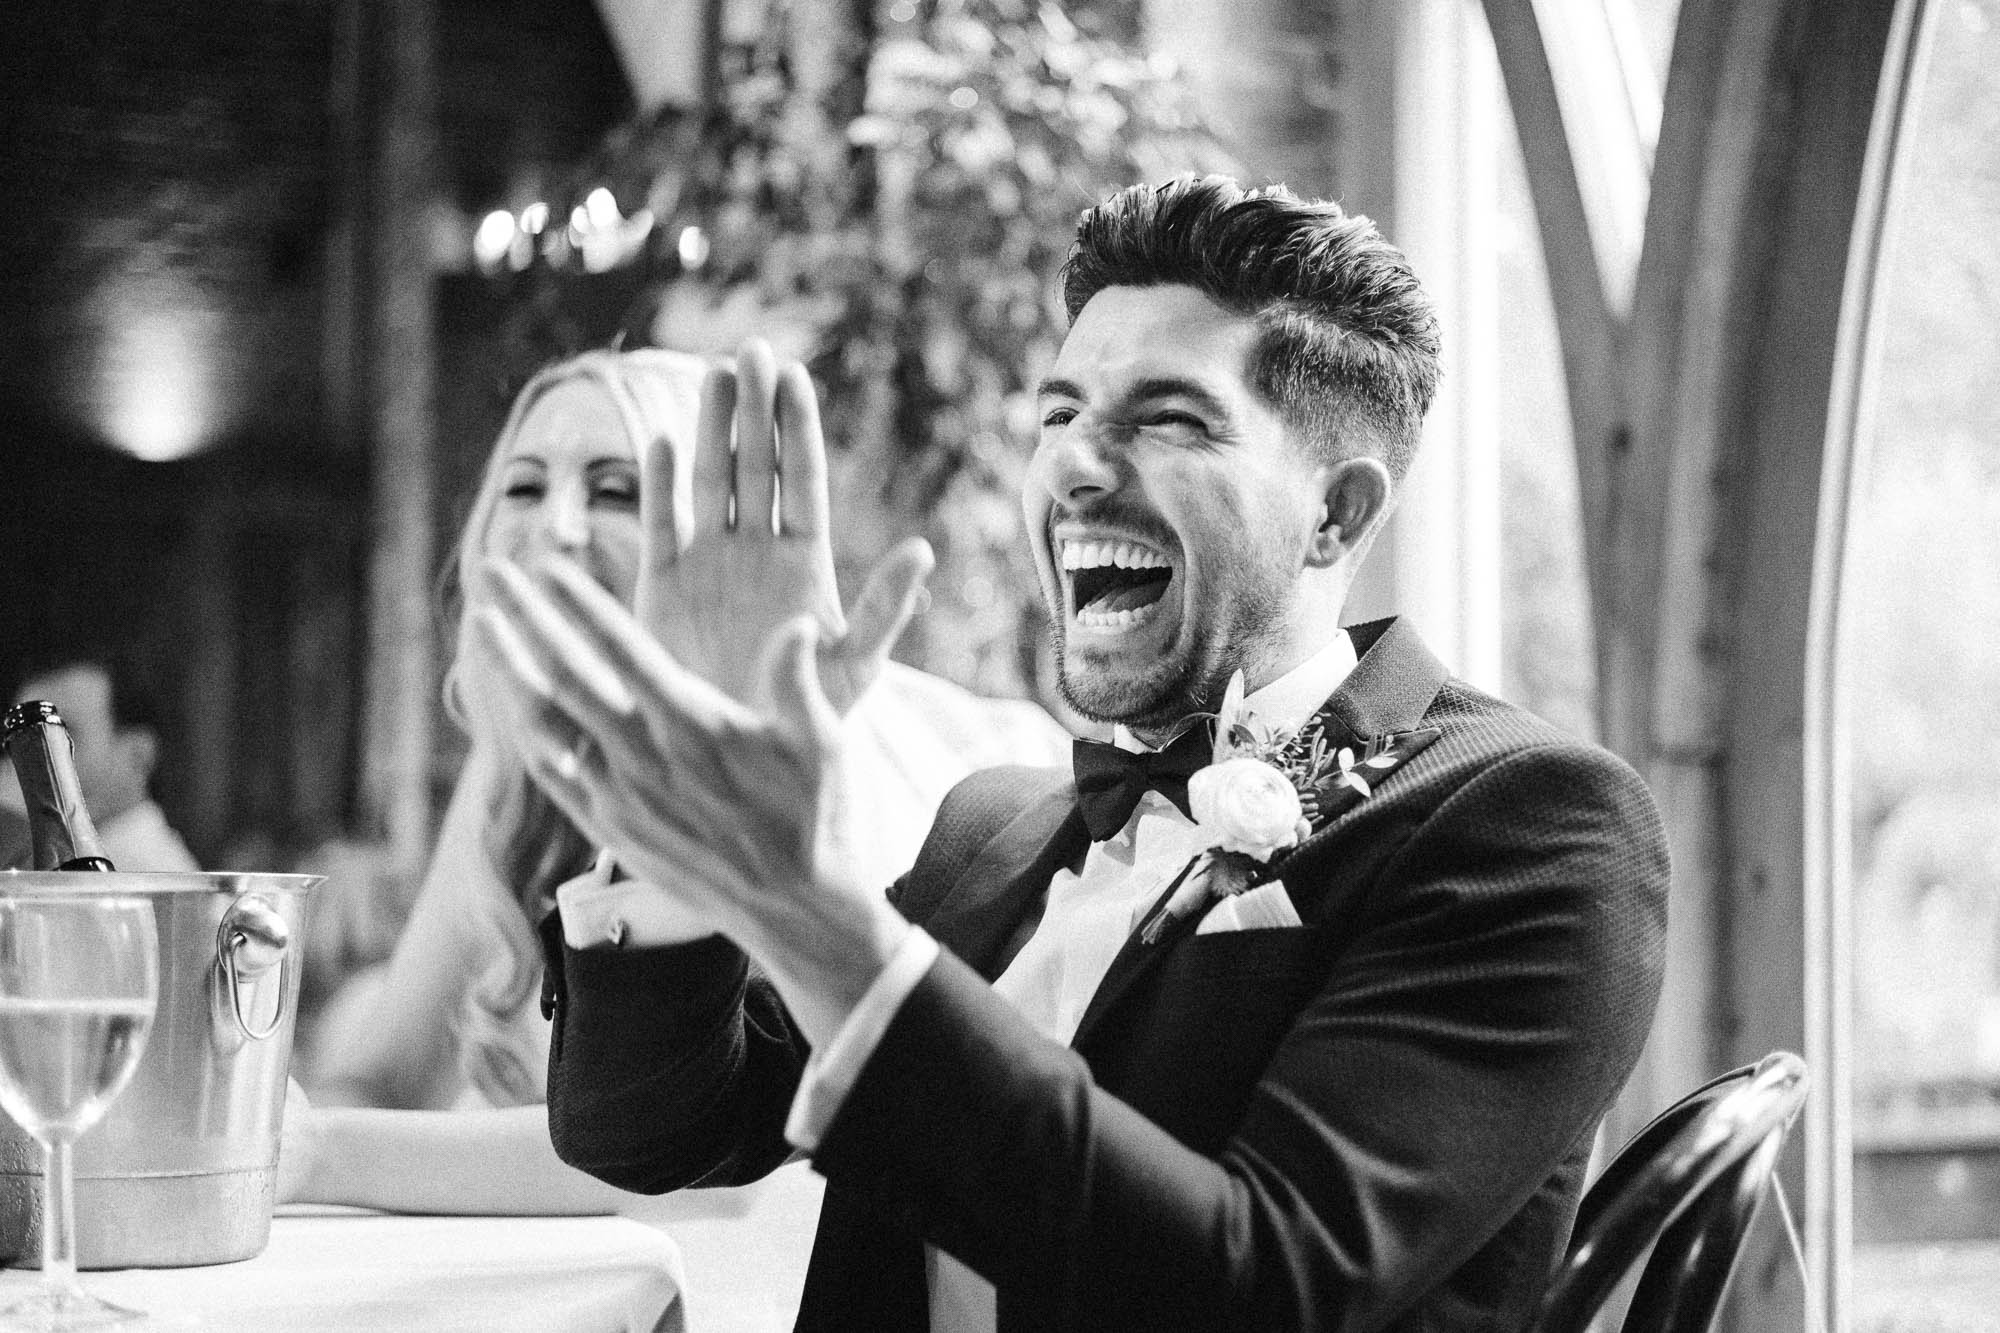 Monochrome shot of Groom laughing and clapping at wedding reception banter